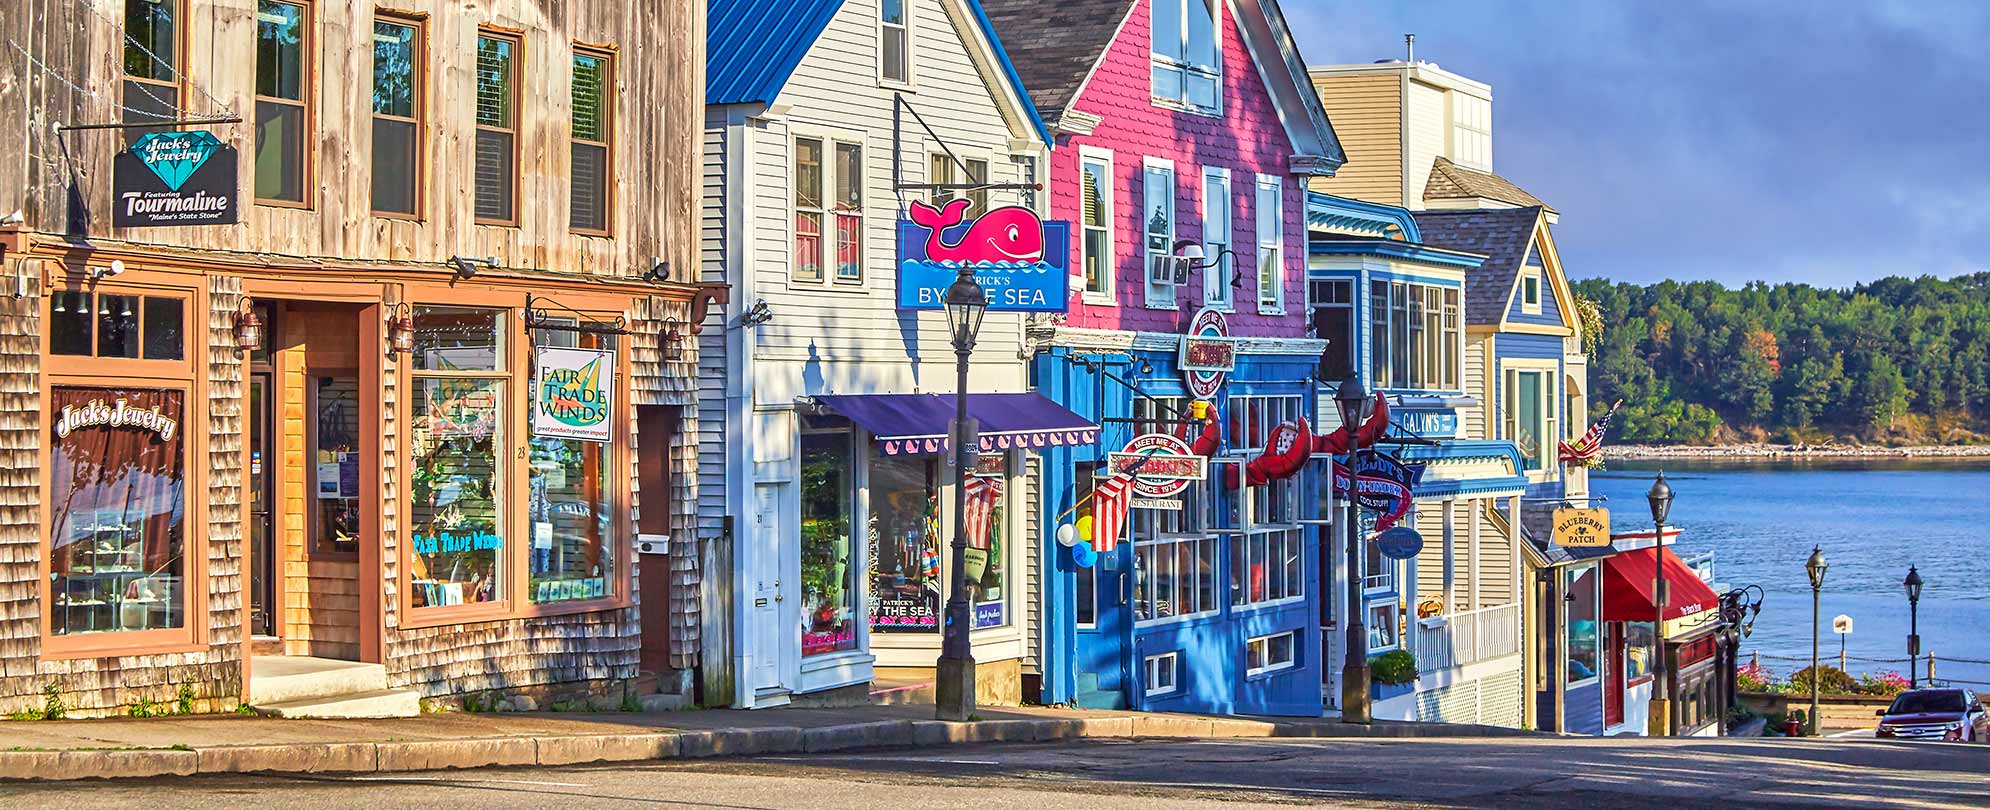 Storefronts in downtown Bar Harbor, a port stop on a Canada New England cruise.